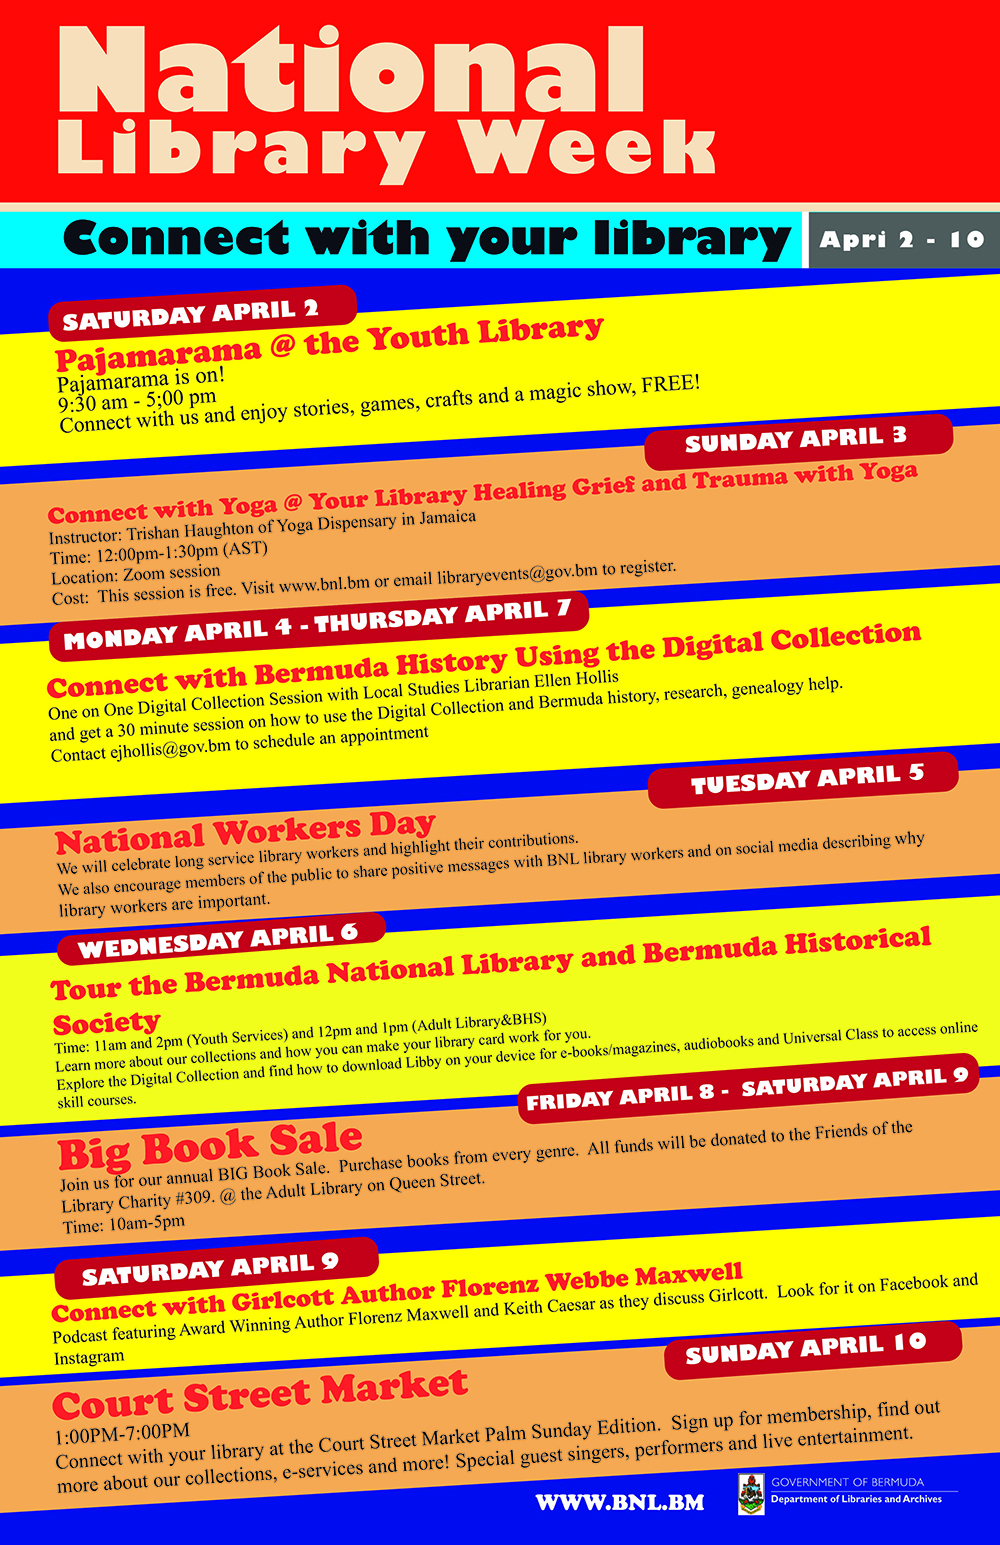 National Library Week events tab [Recovered]